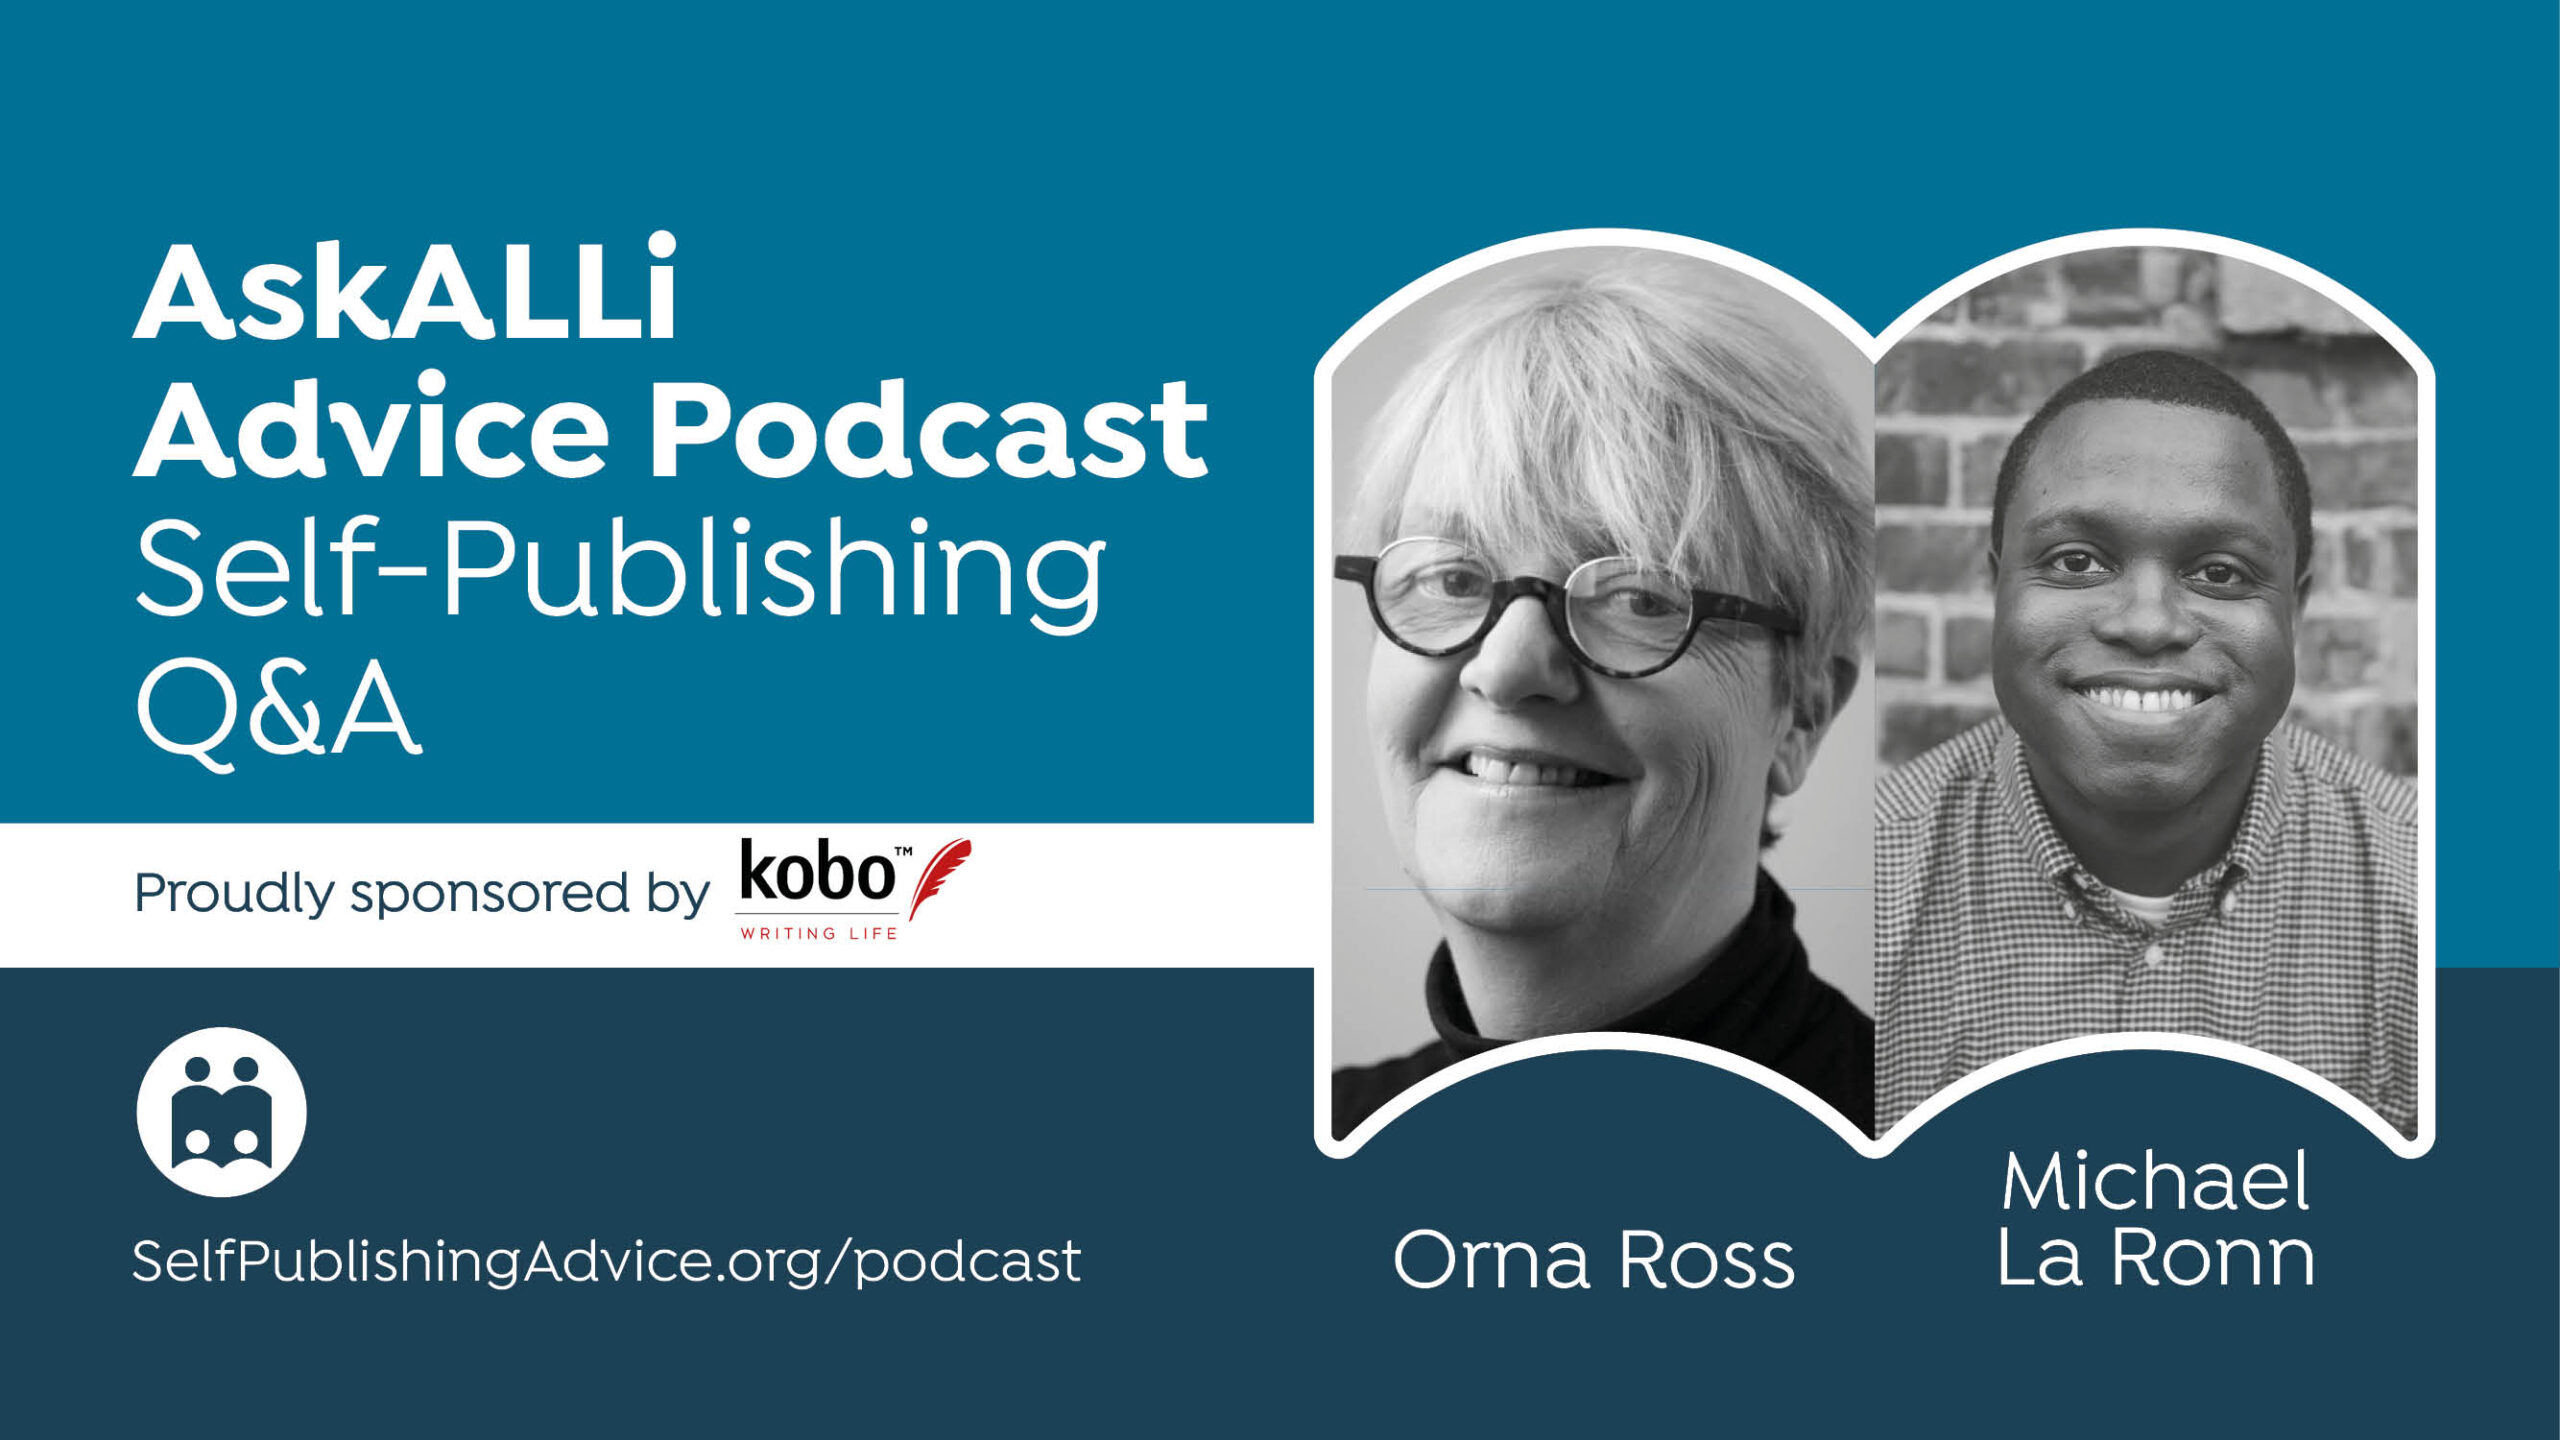 How Do I Grow My Email List? Other Questions Answered By Orna Ross And Michael La Ronn In Our Member Q&A Podcast